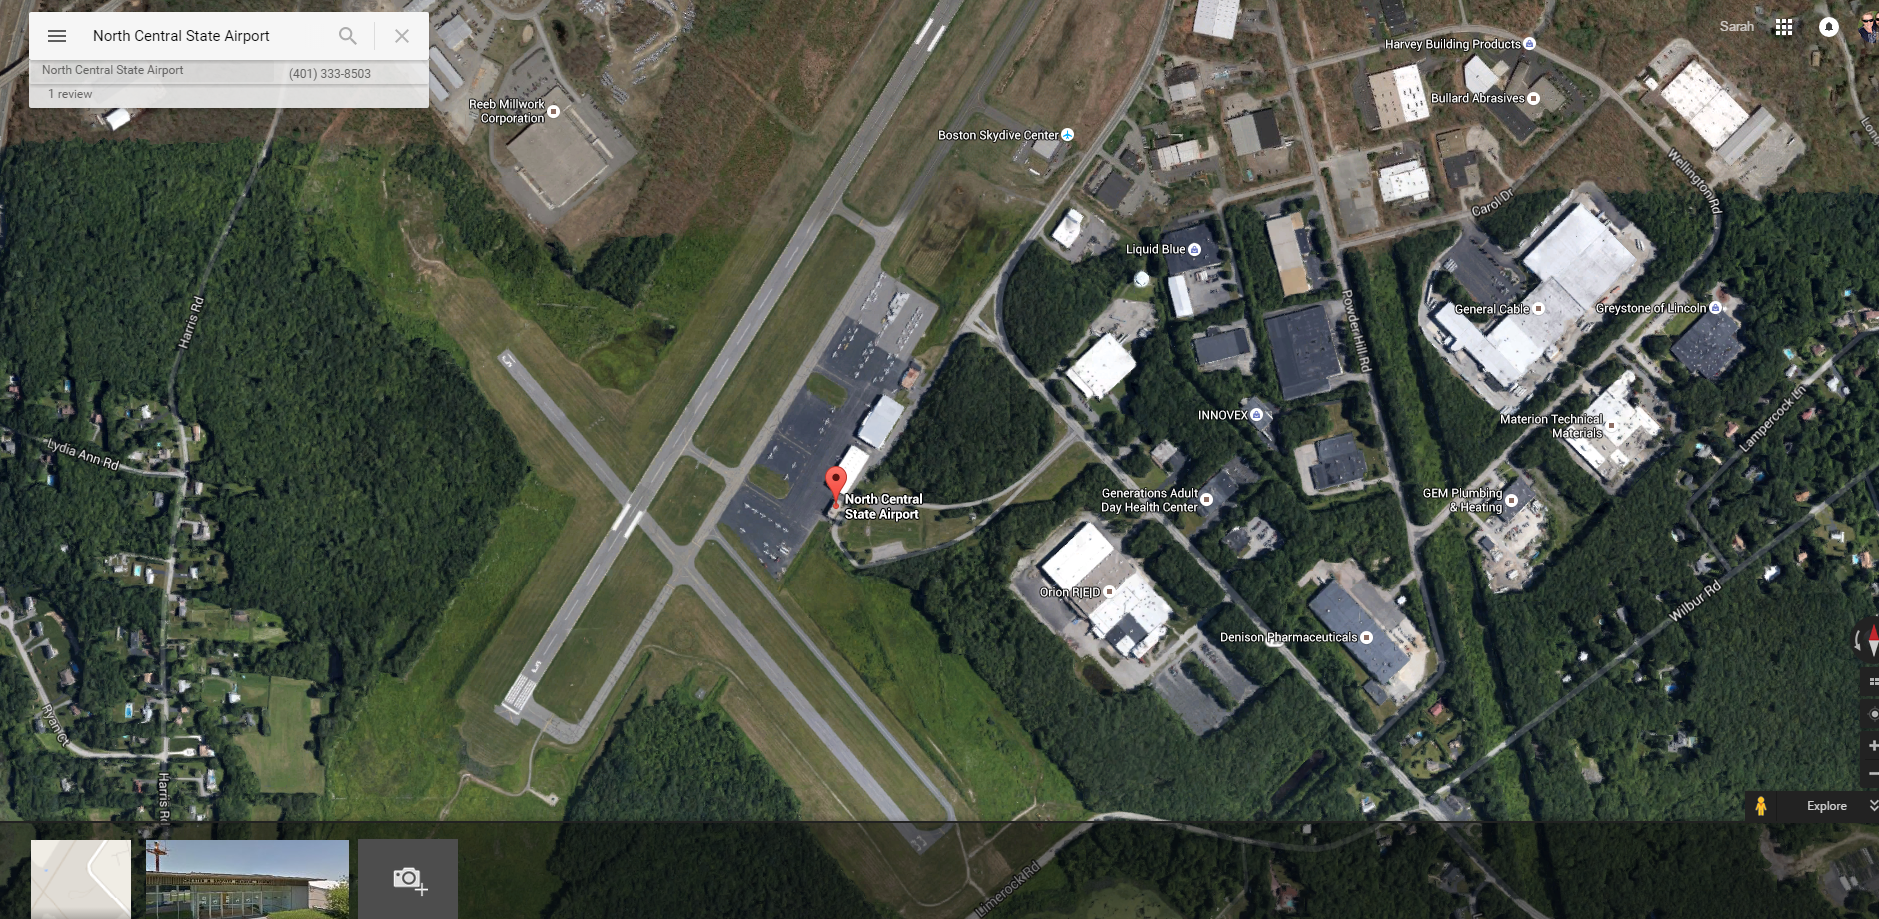 This is the North Central State Airport